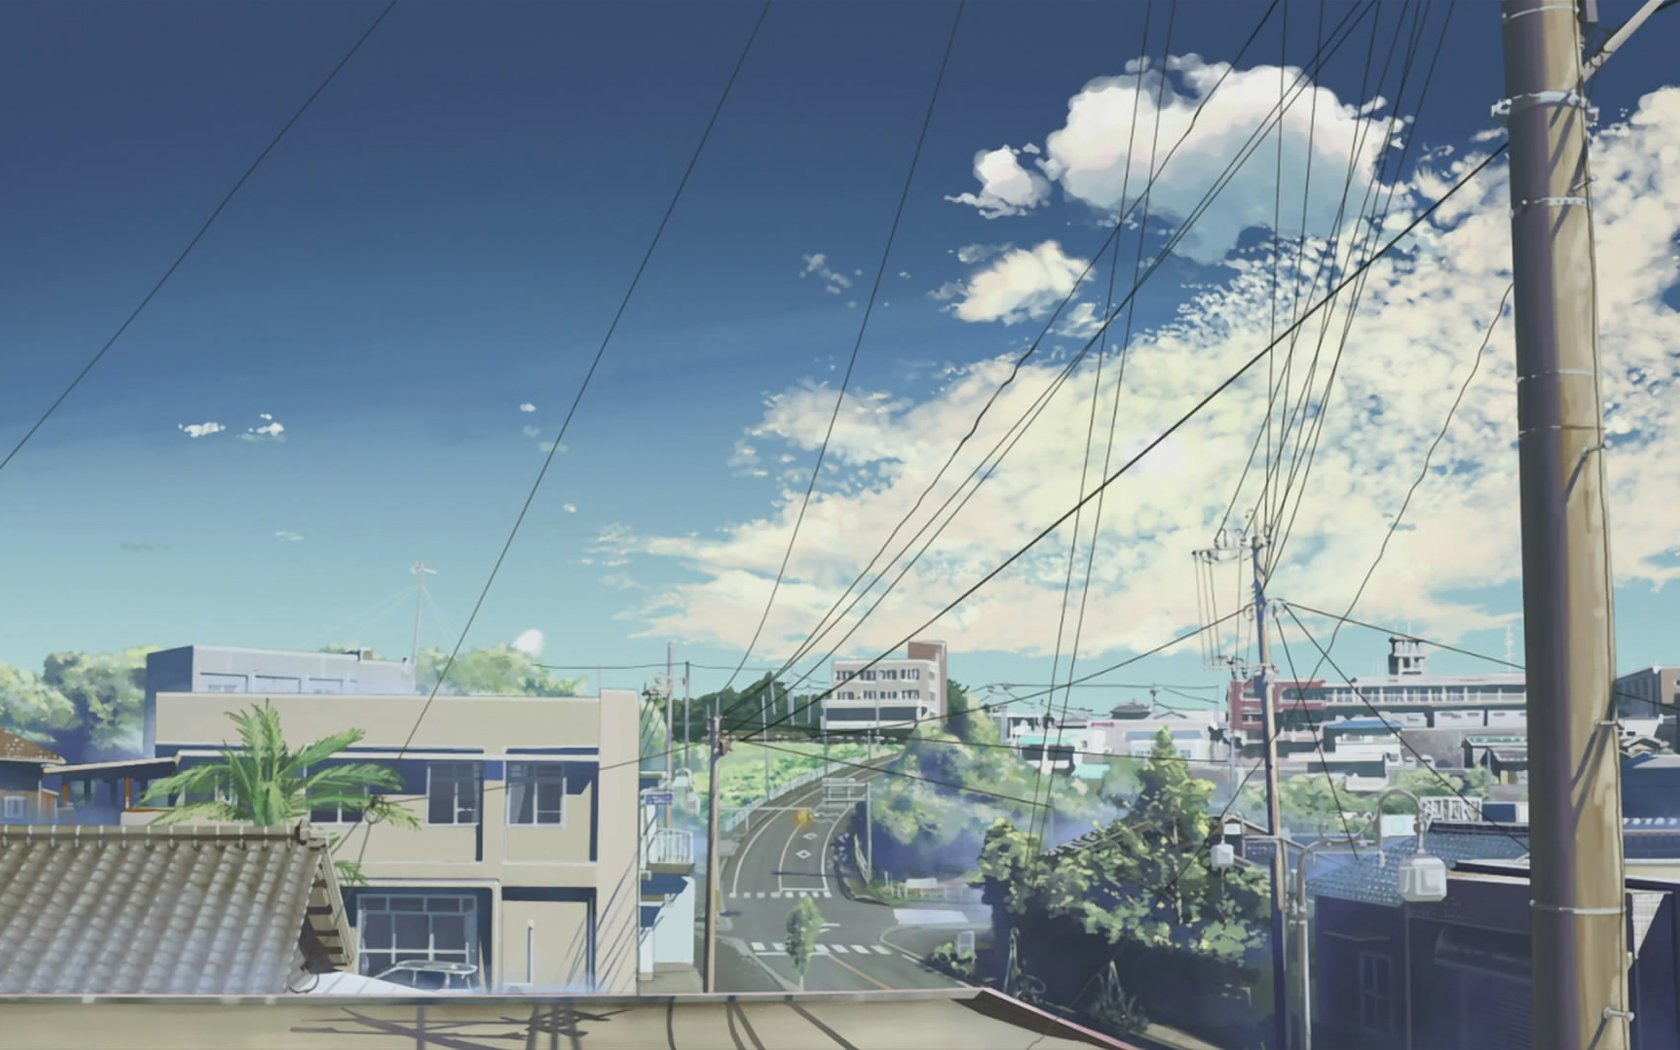 Aesthetic Backgrounds Anime HD Free Download 